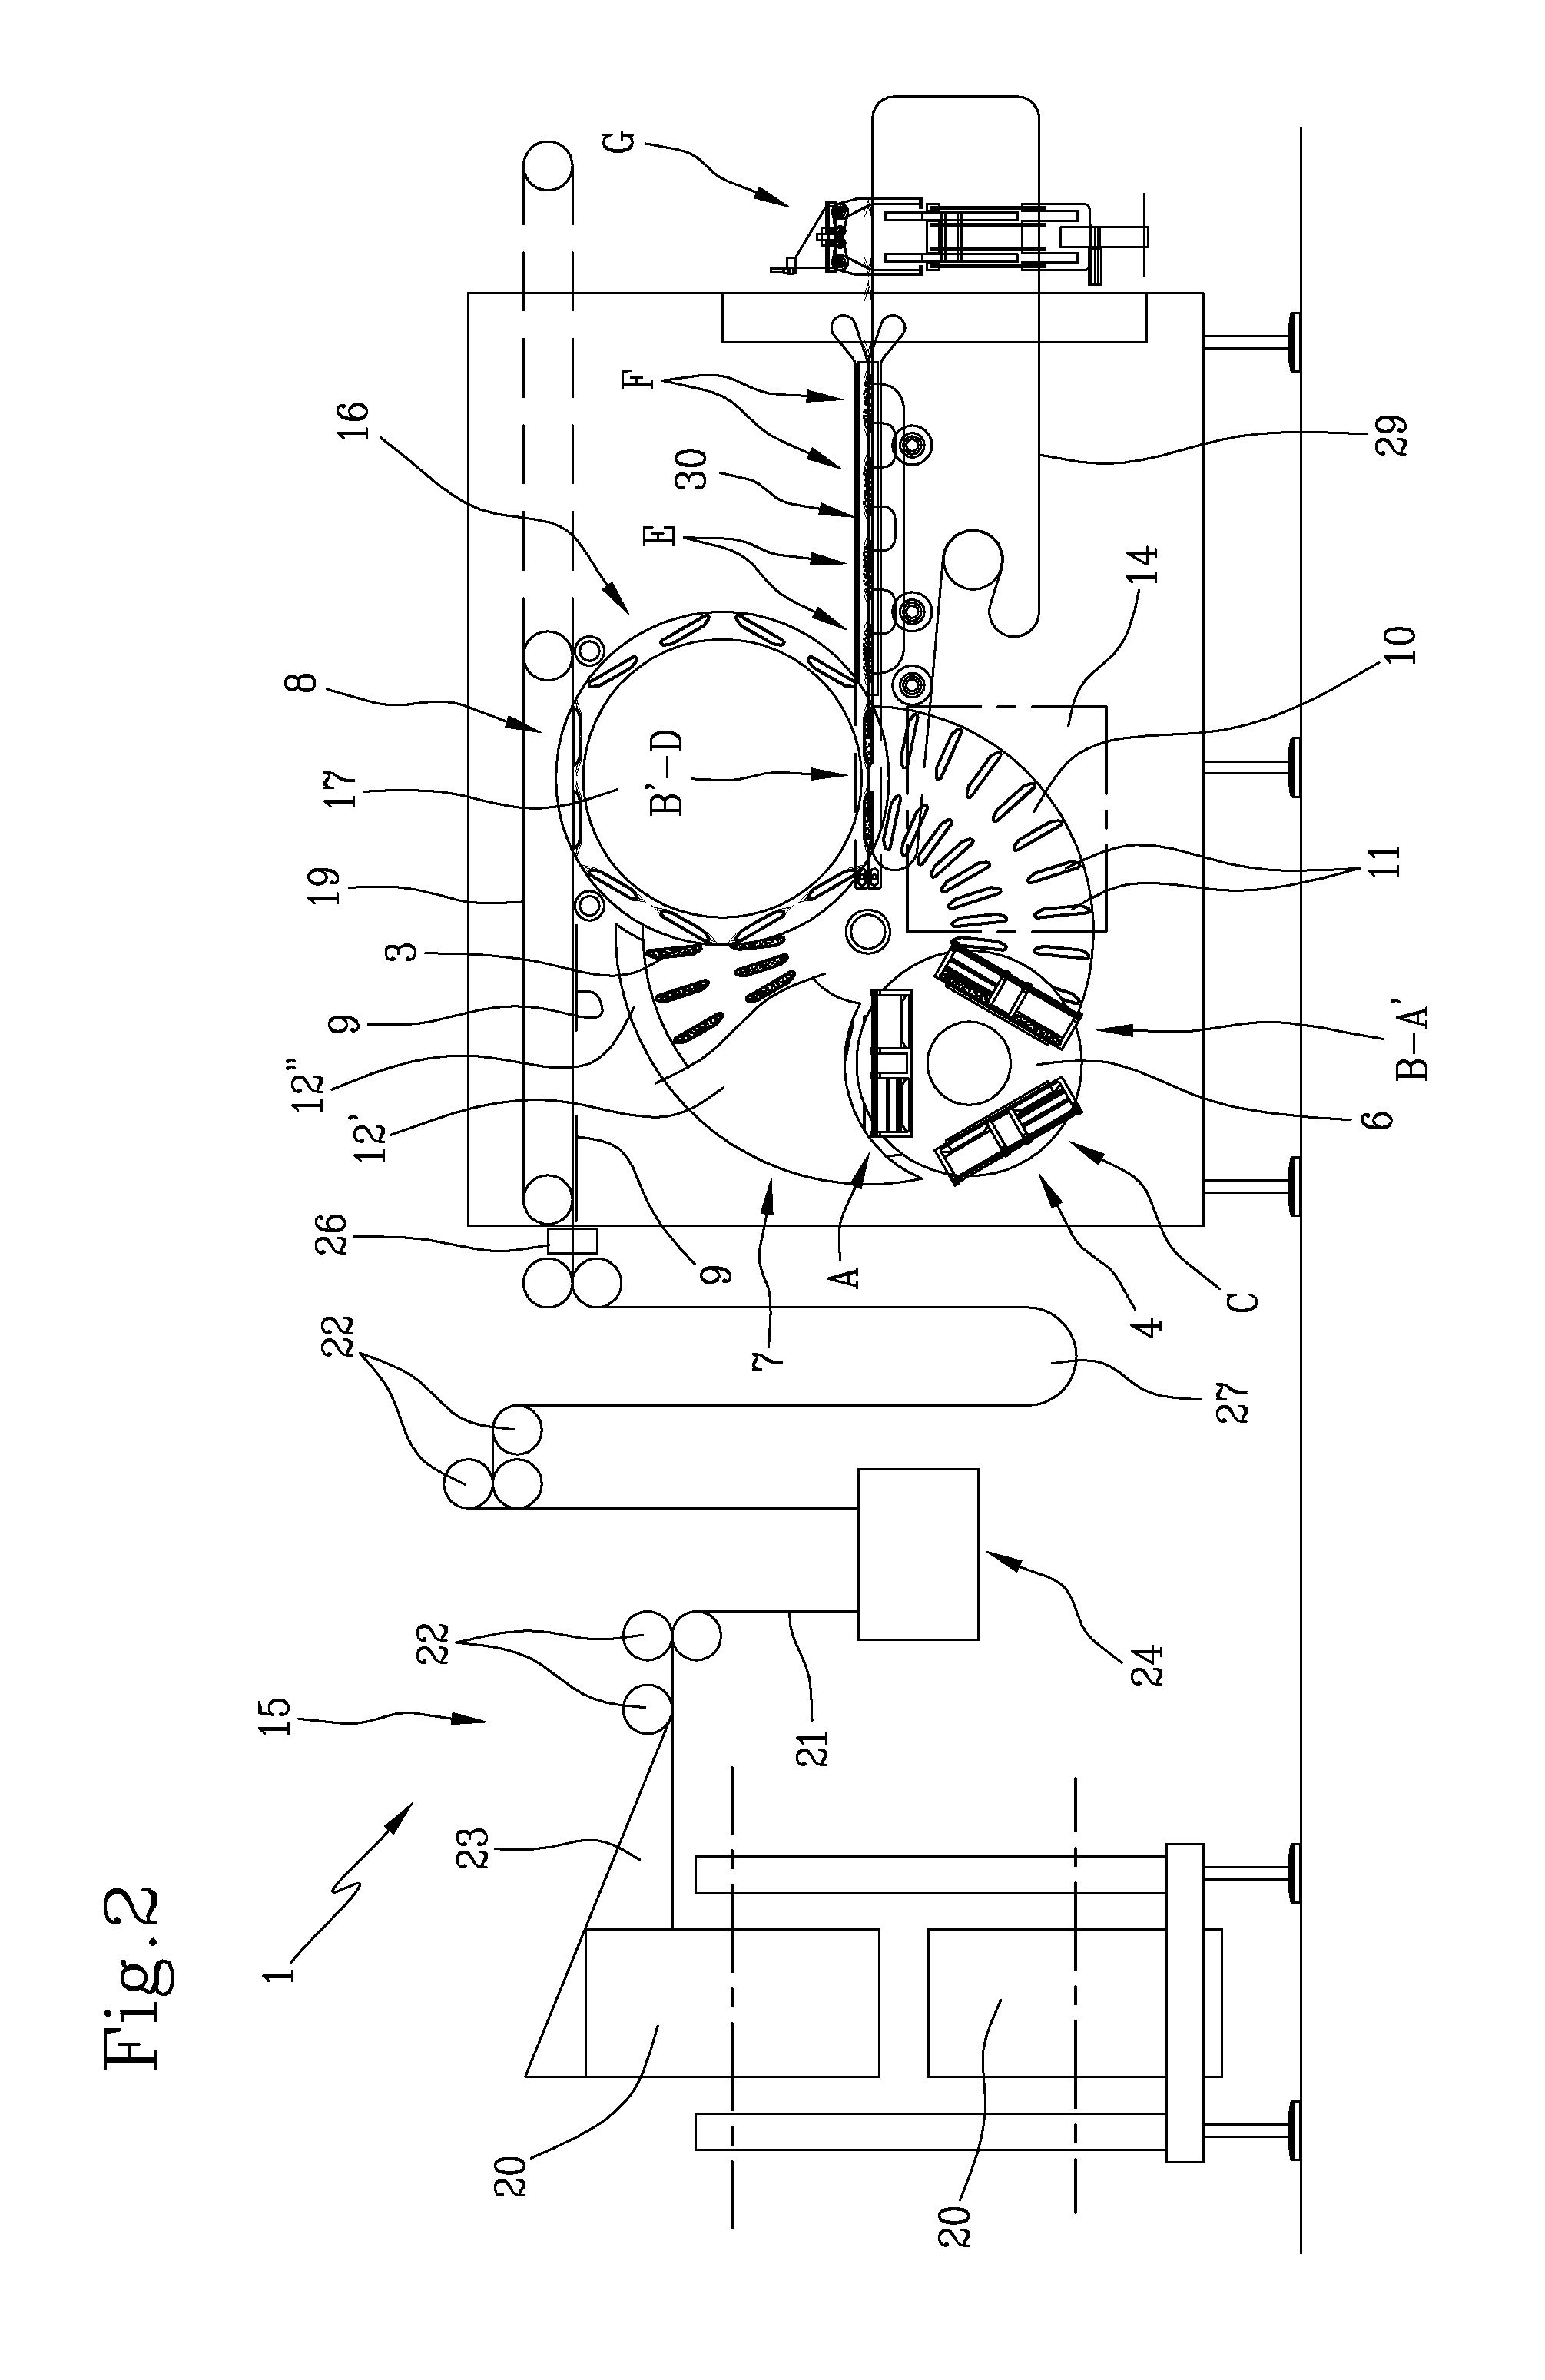 Machine and method for packaging fiber material